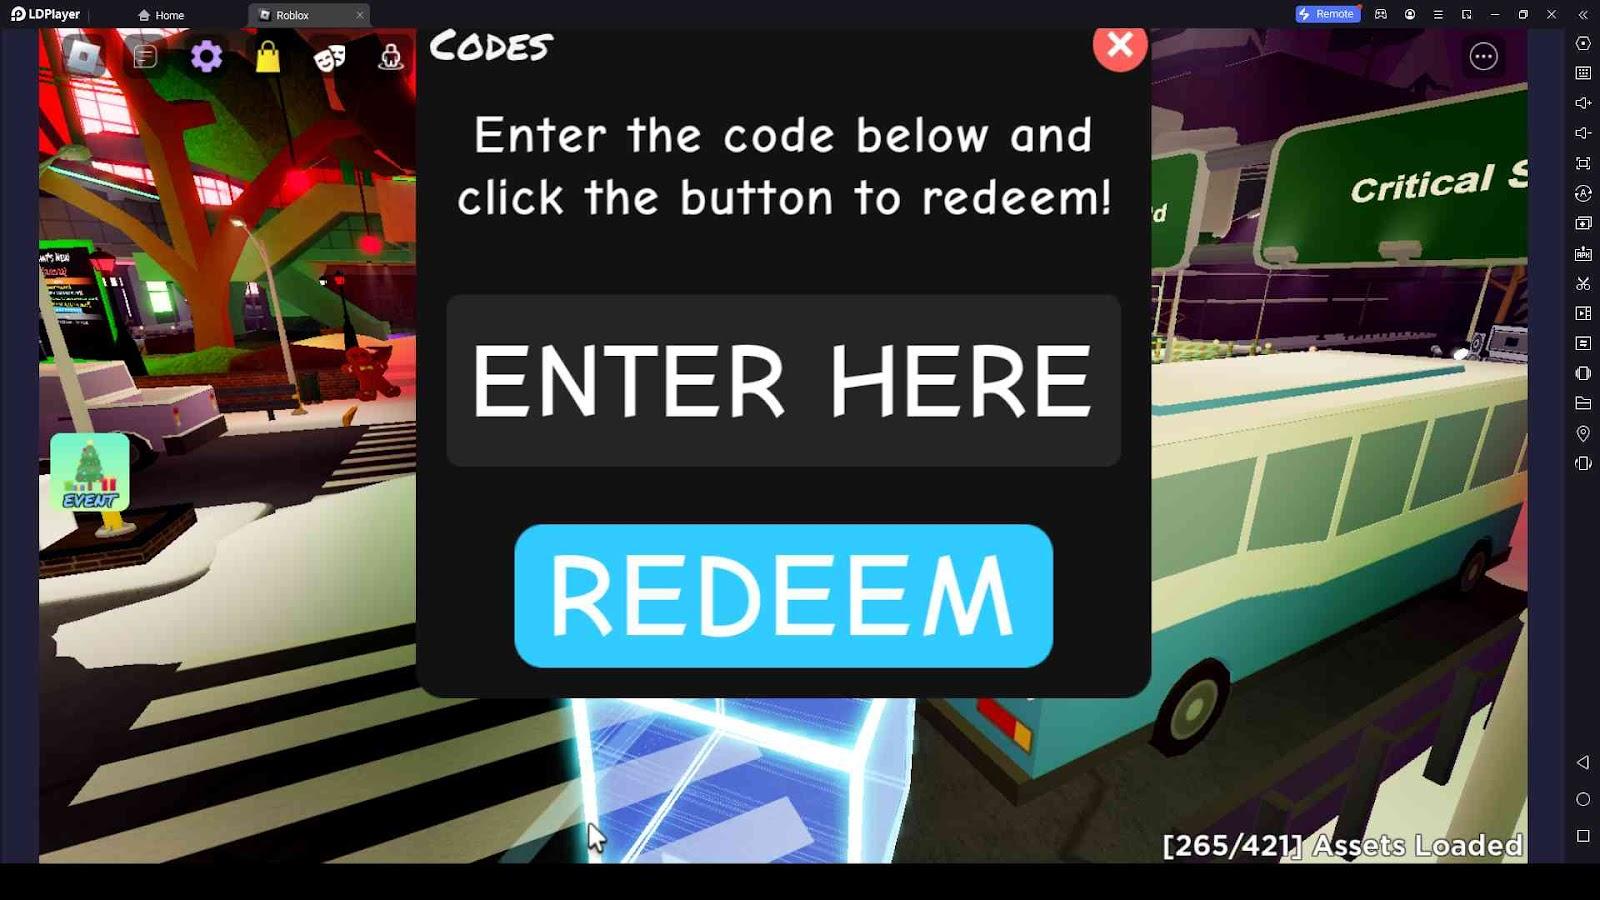 All Funky Friday Codes in Roblox